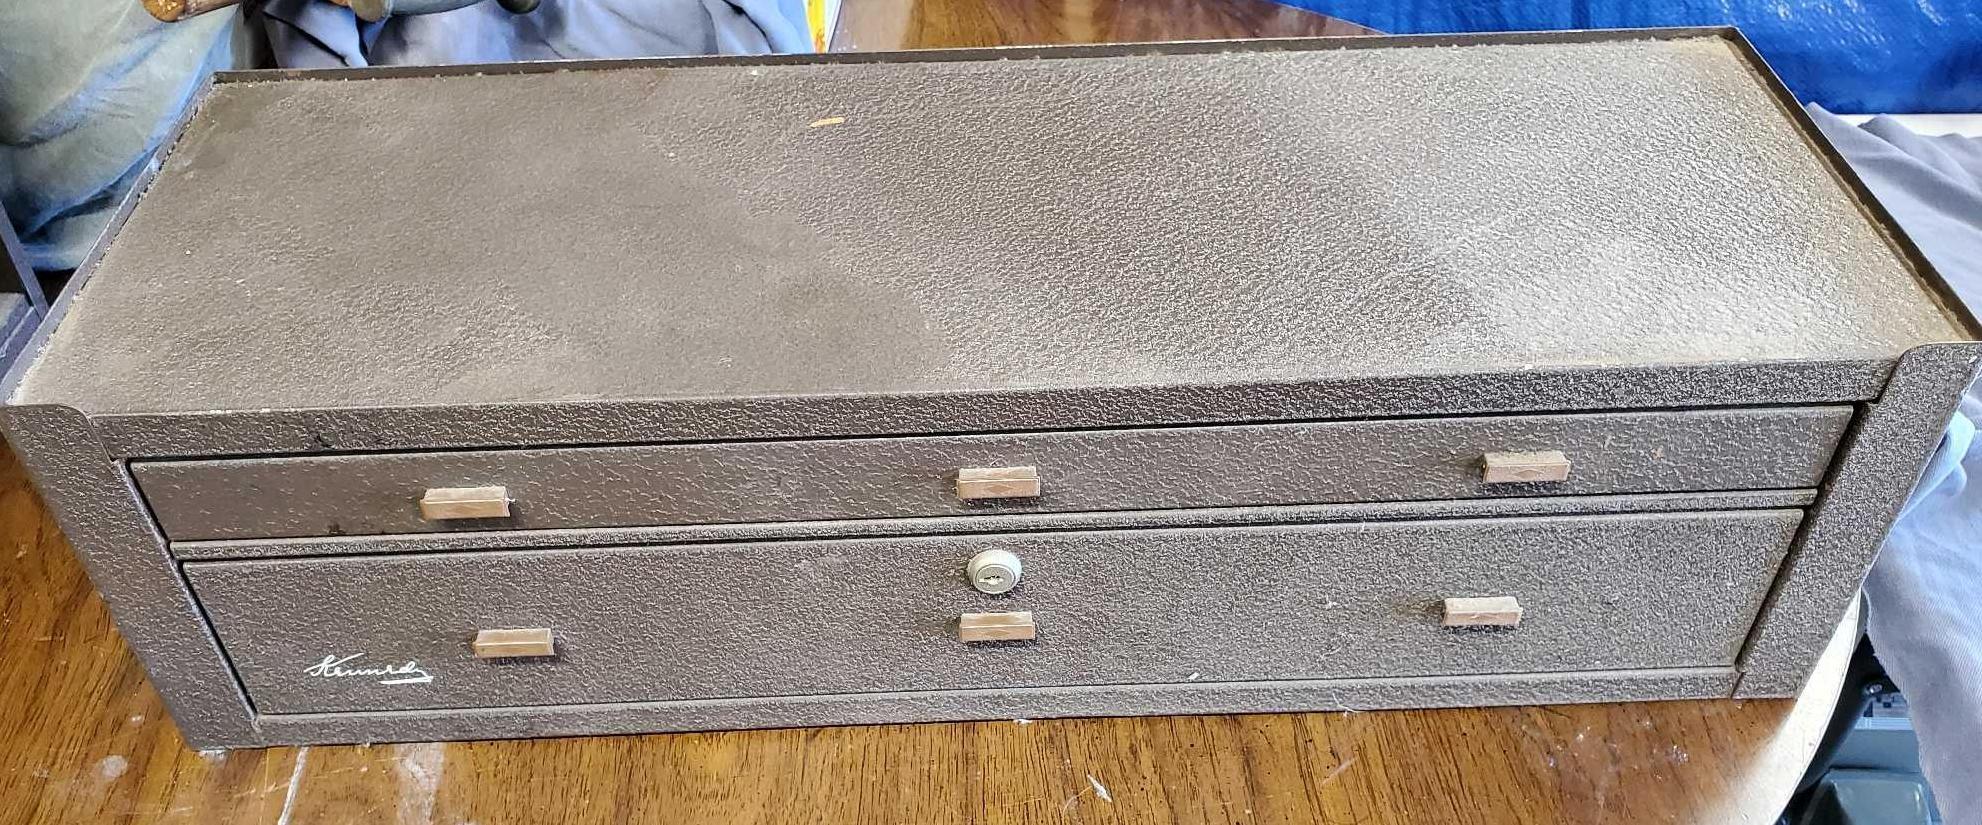 VINTAGE KENNEDY MACHINIST TOOL BOX WITH CONTENTS